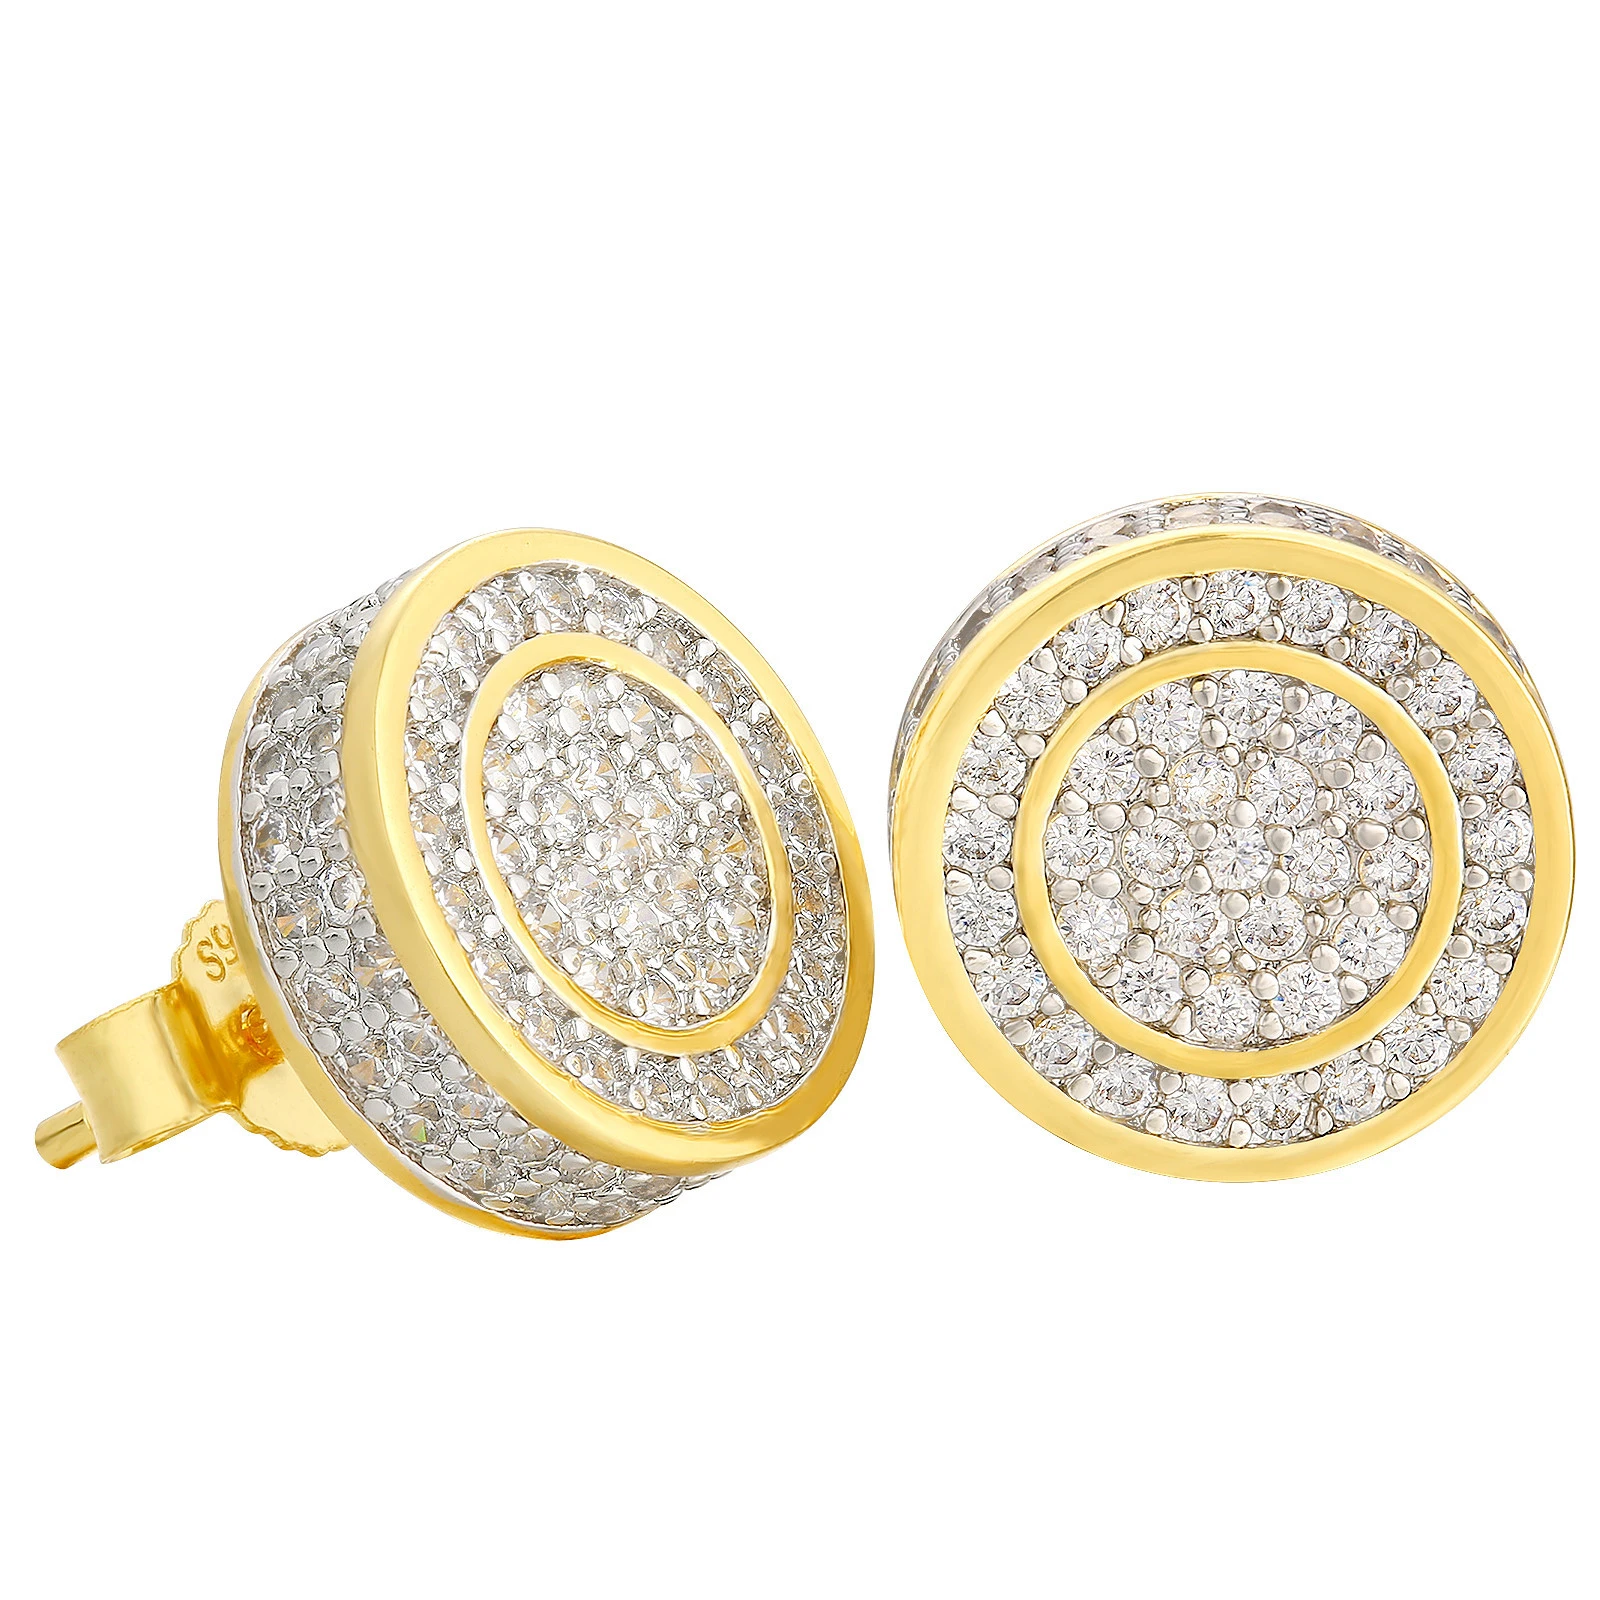 KRKC&amp;CO 14K Gold Iced Out Round Shape Earrings Hip Hop Jewelry for amazon/ebay/wish online store for Wholesale Agent in Stock